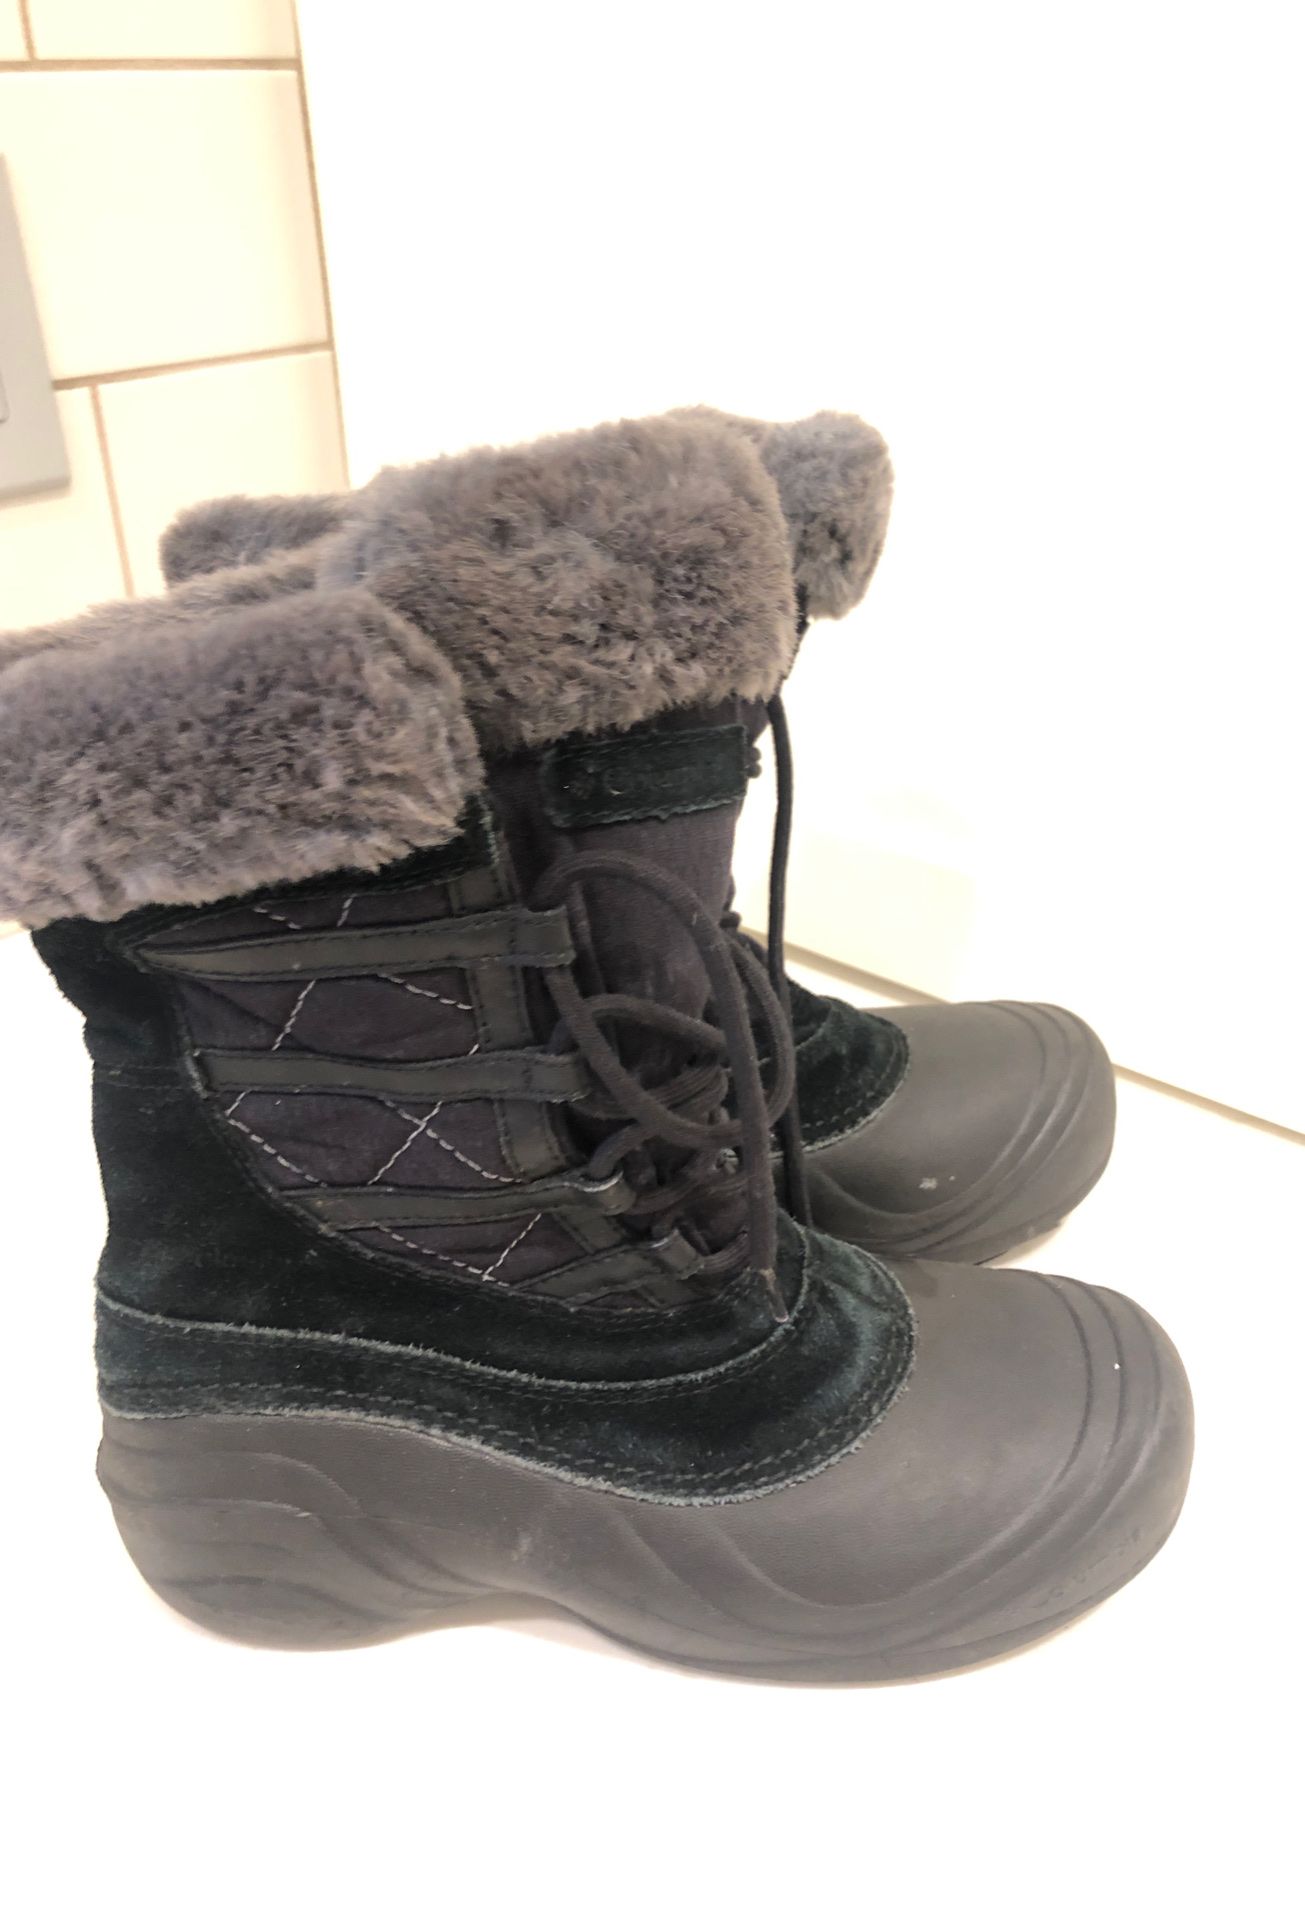 Women’s Columbia snow boots size 6